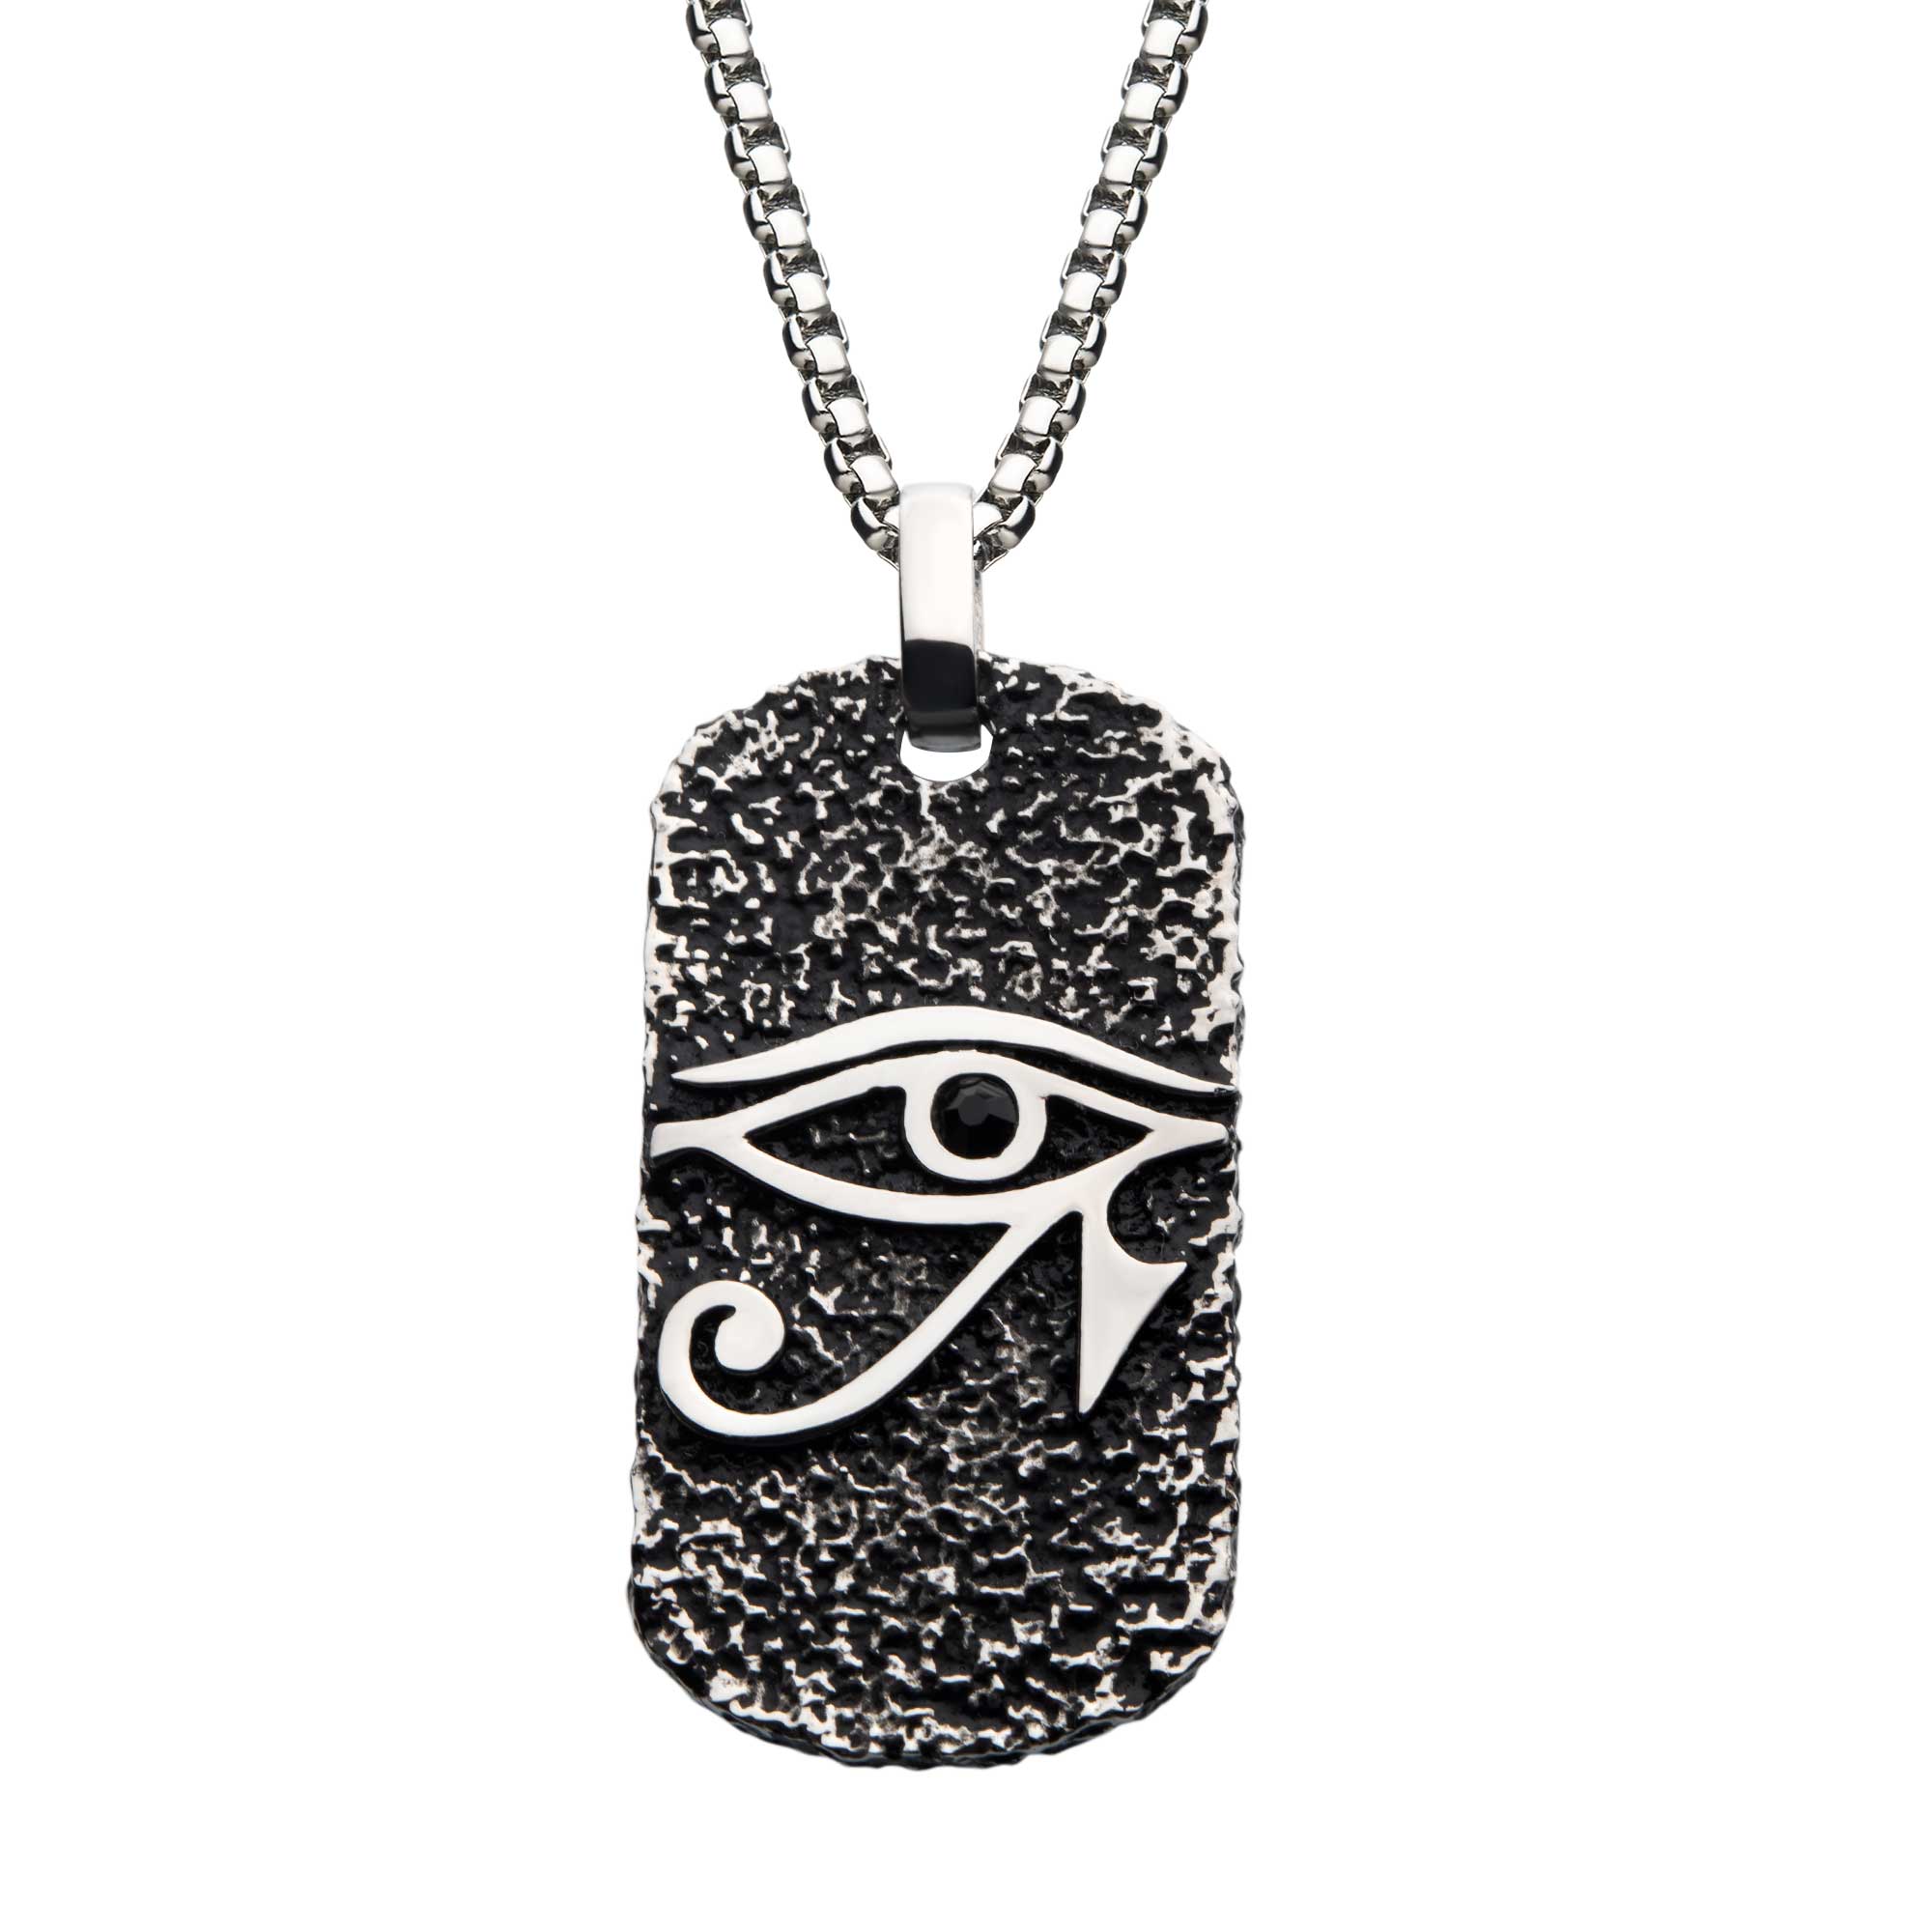 Black Oxidized Stainless Steel with Black CZ Eye of Horus Dog Tag Pendant, with Steel Box Chain Mitchell's Jewelry Norman, OK